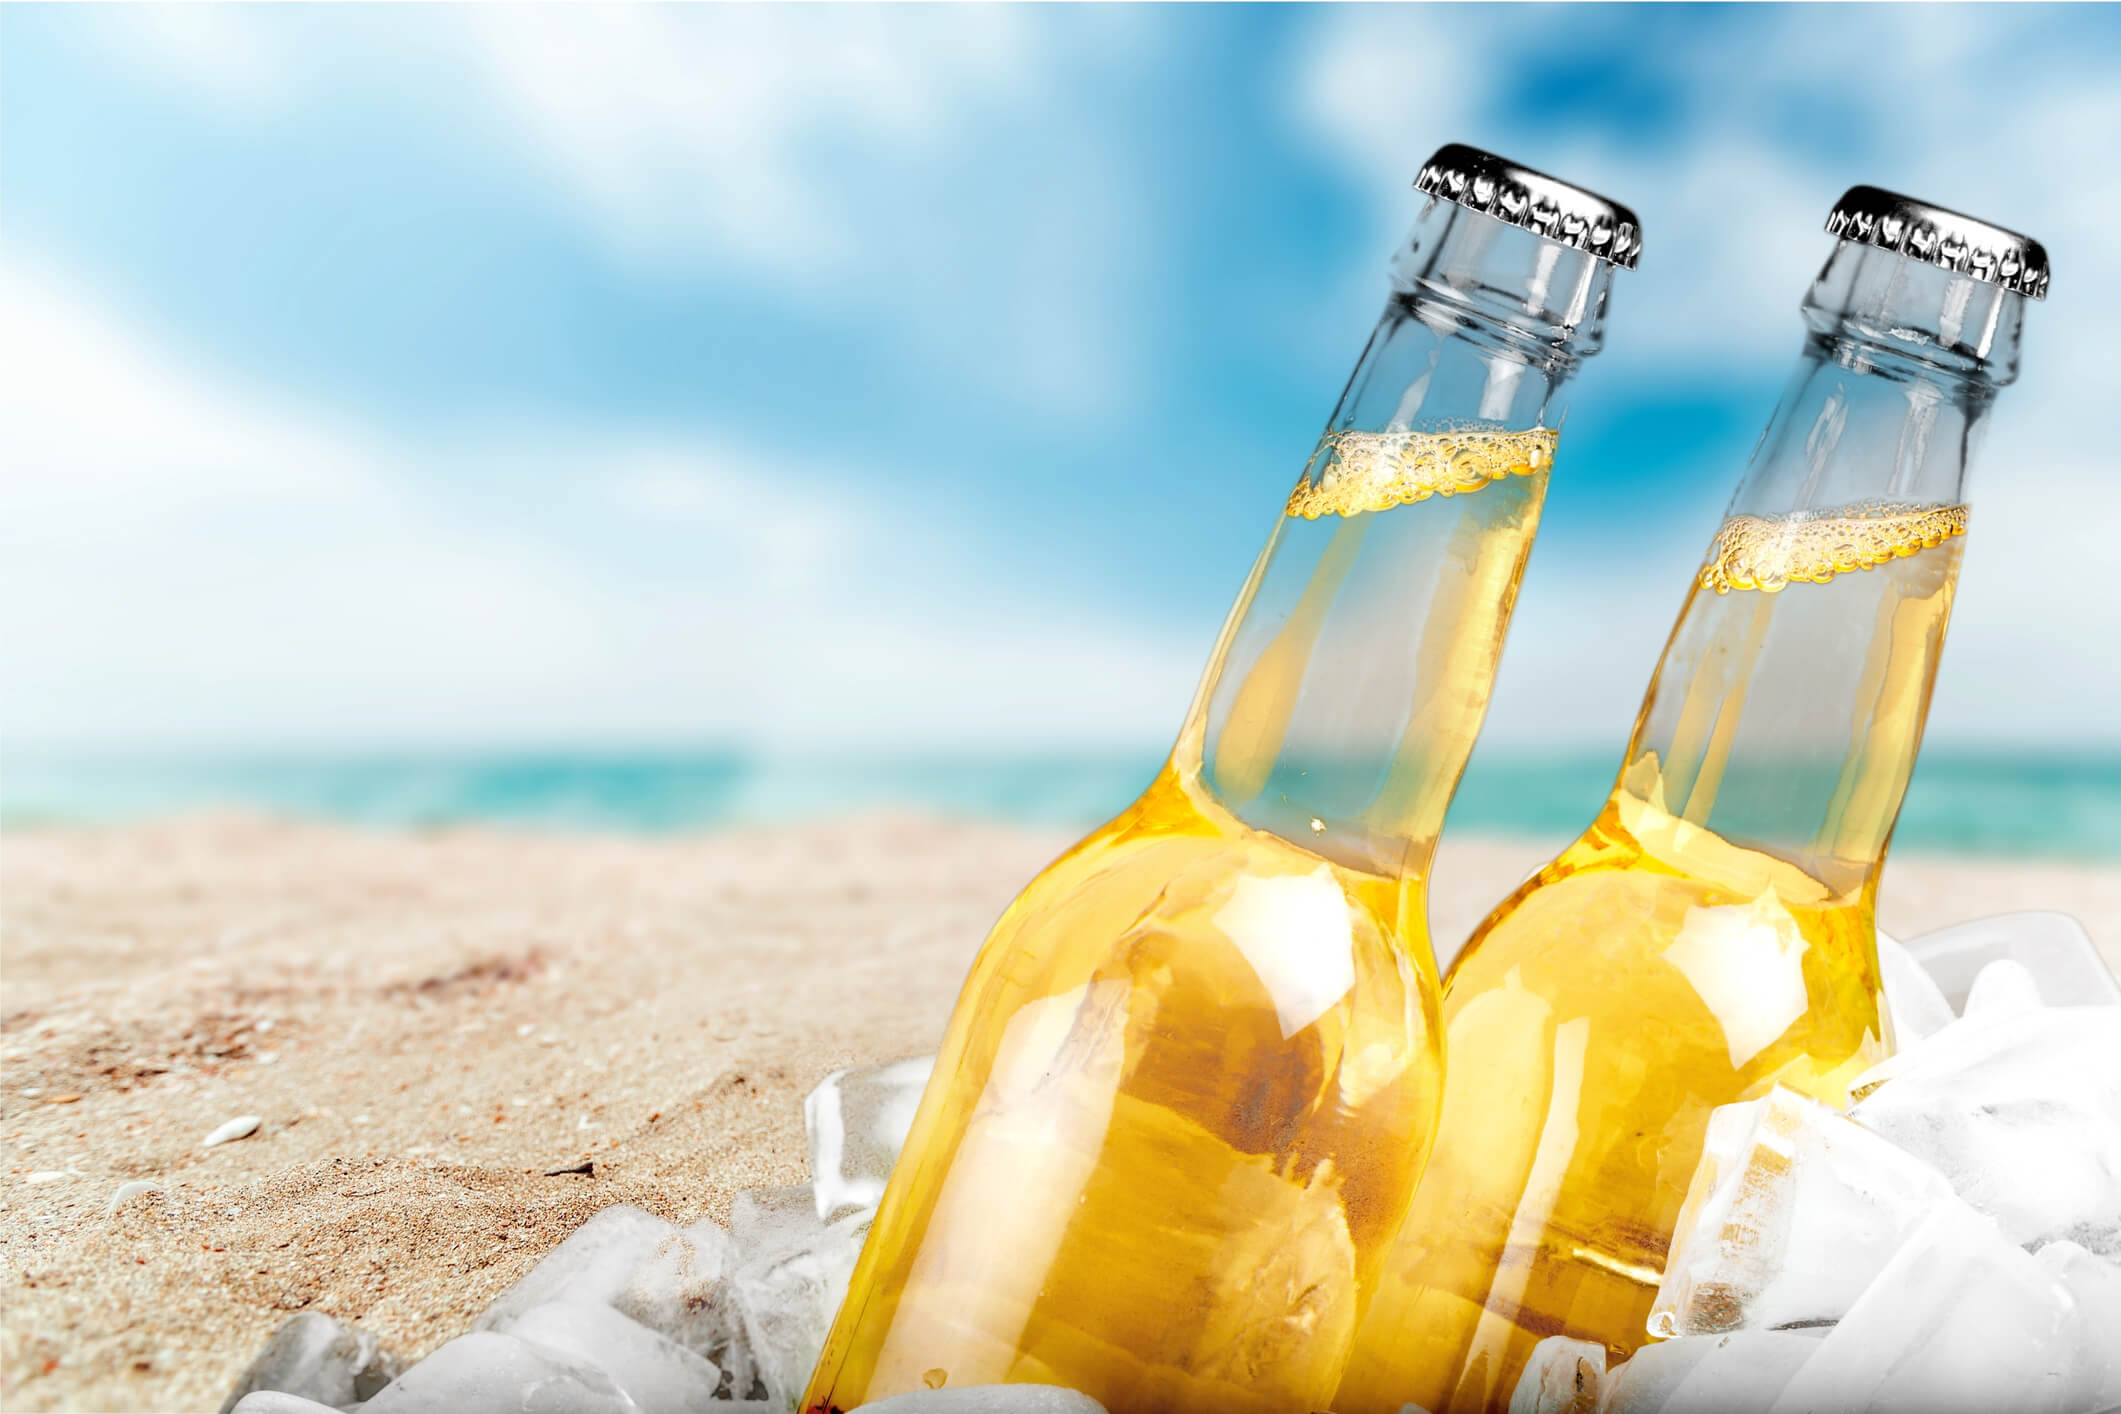 Beer bottles on a beach in ice